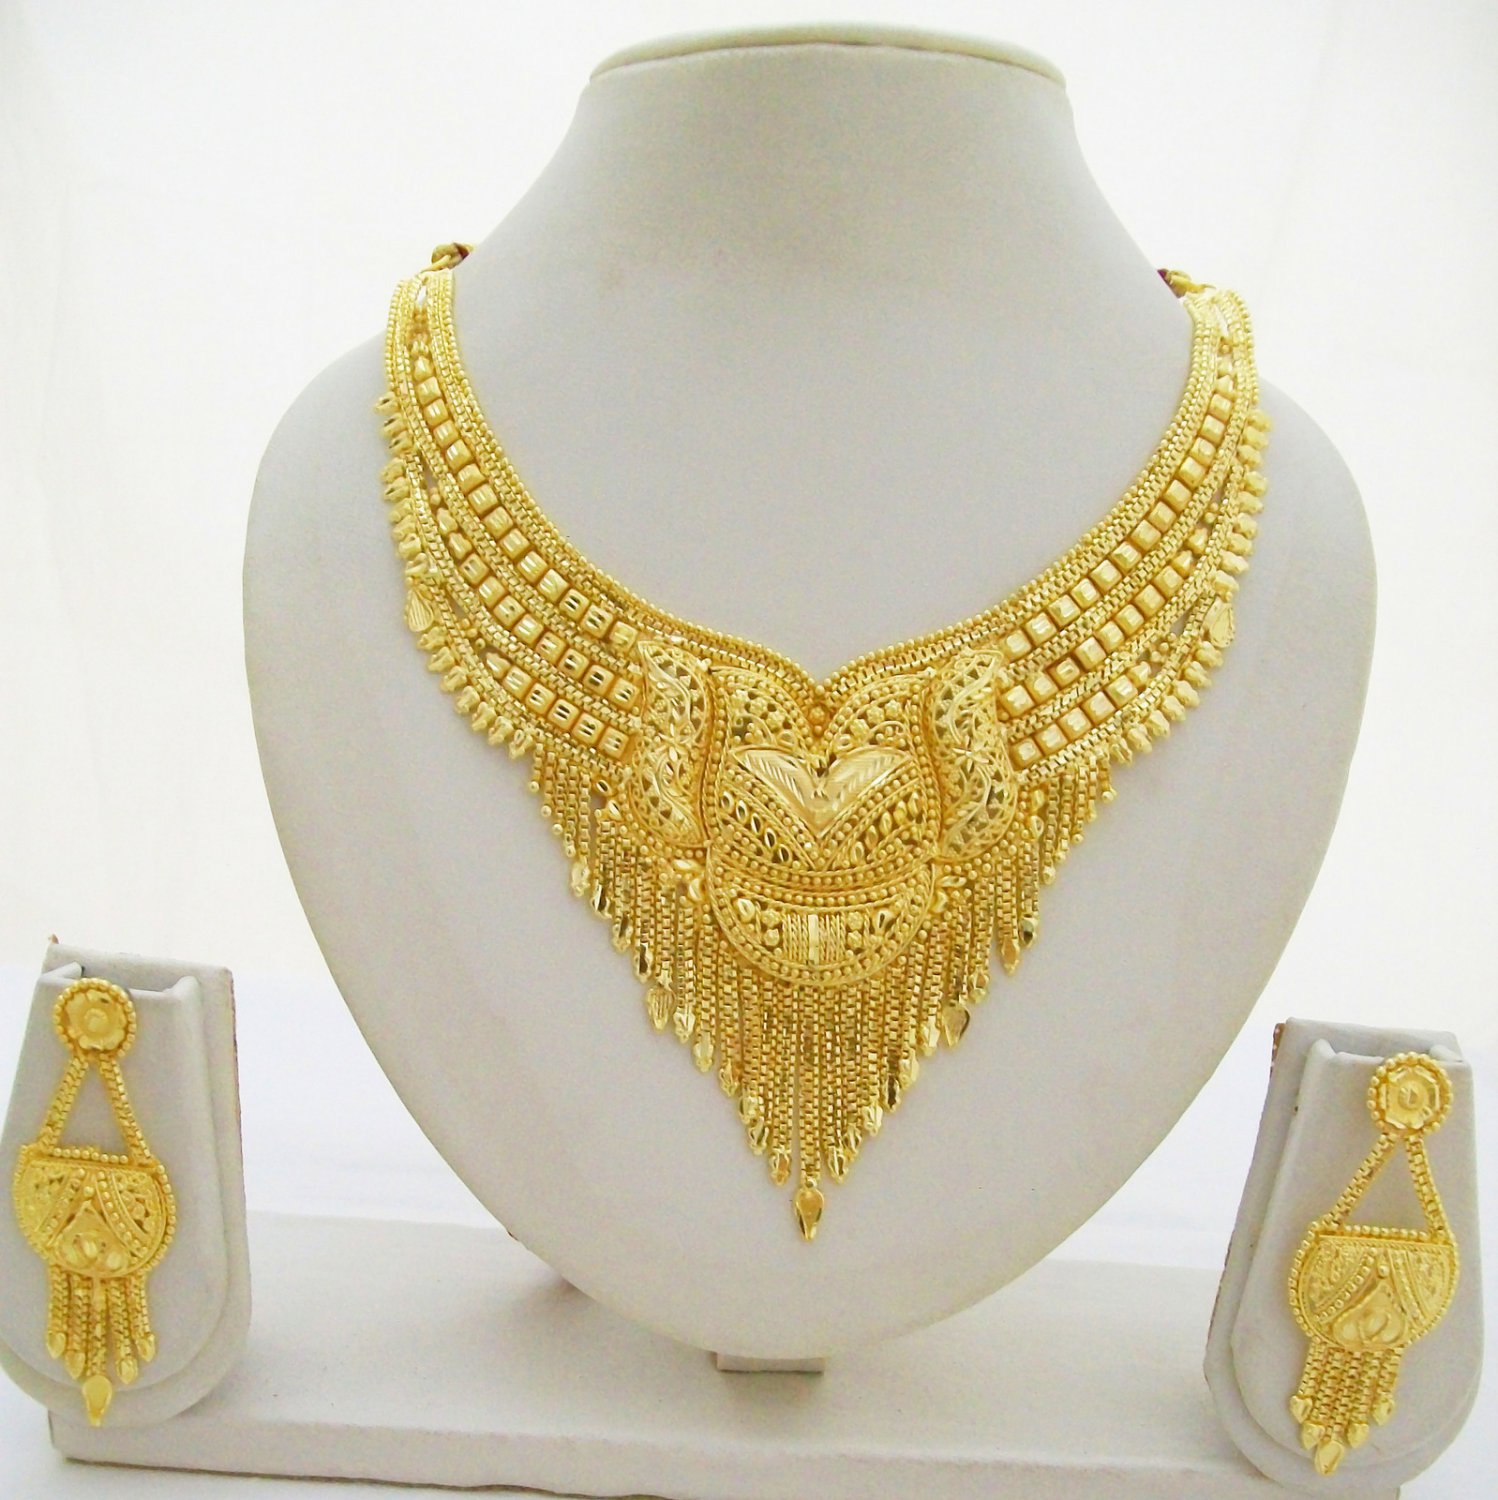 Indian Gold Plated Choker Necklace Earring Set Ethnic Bridal Jewelry 8453